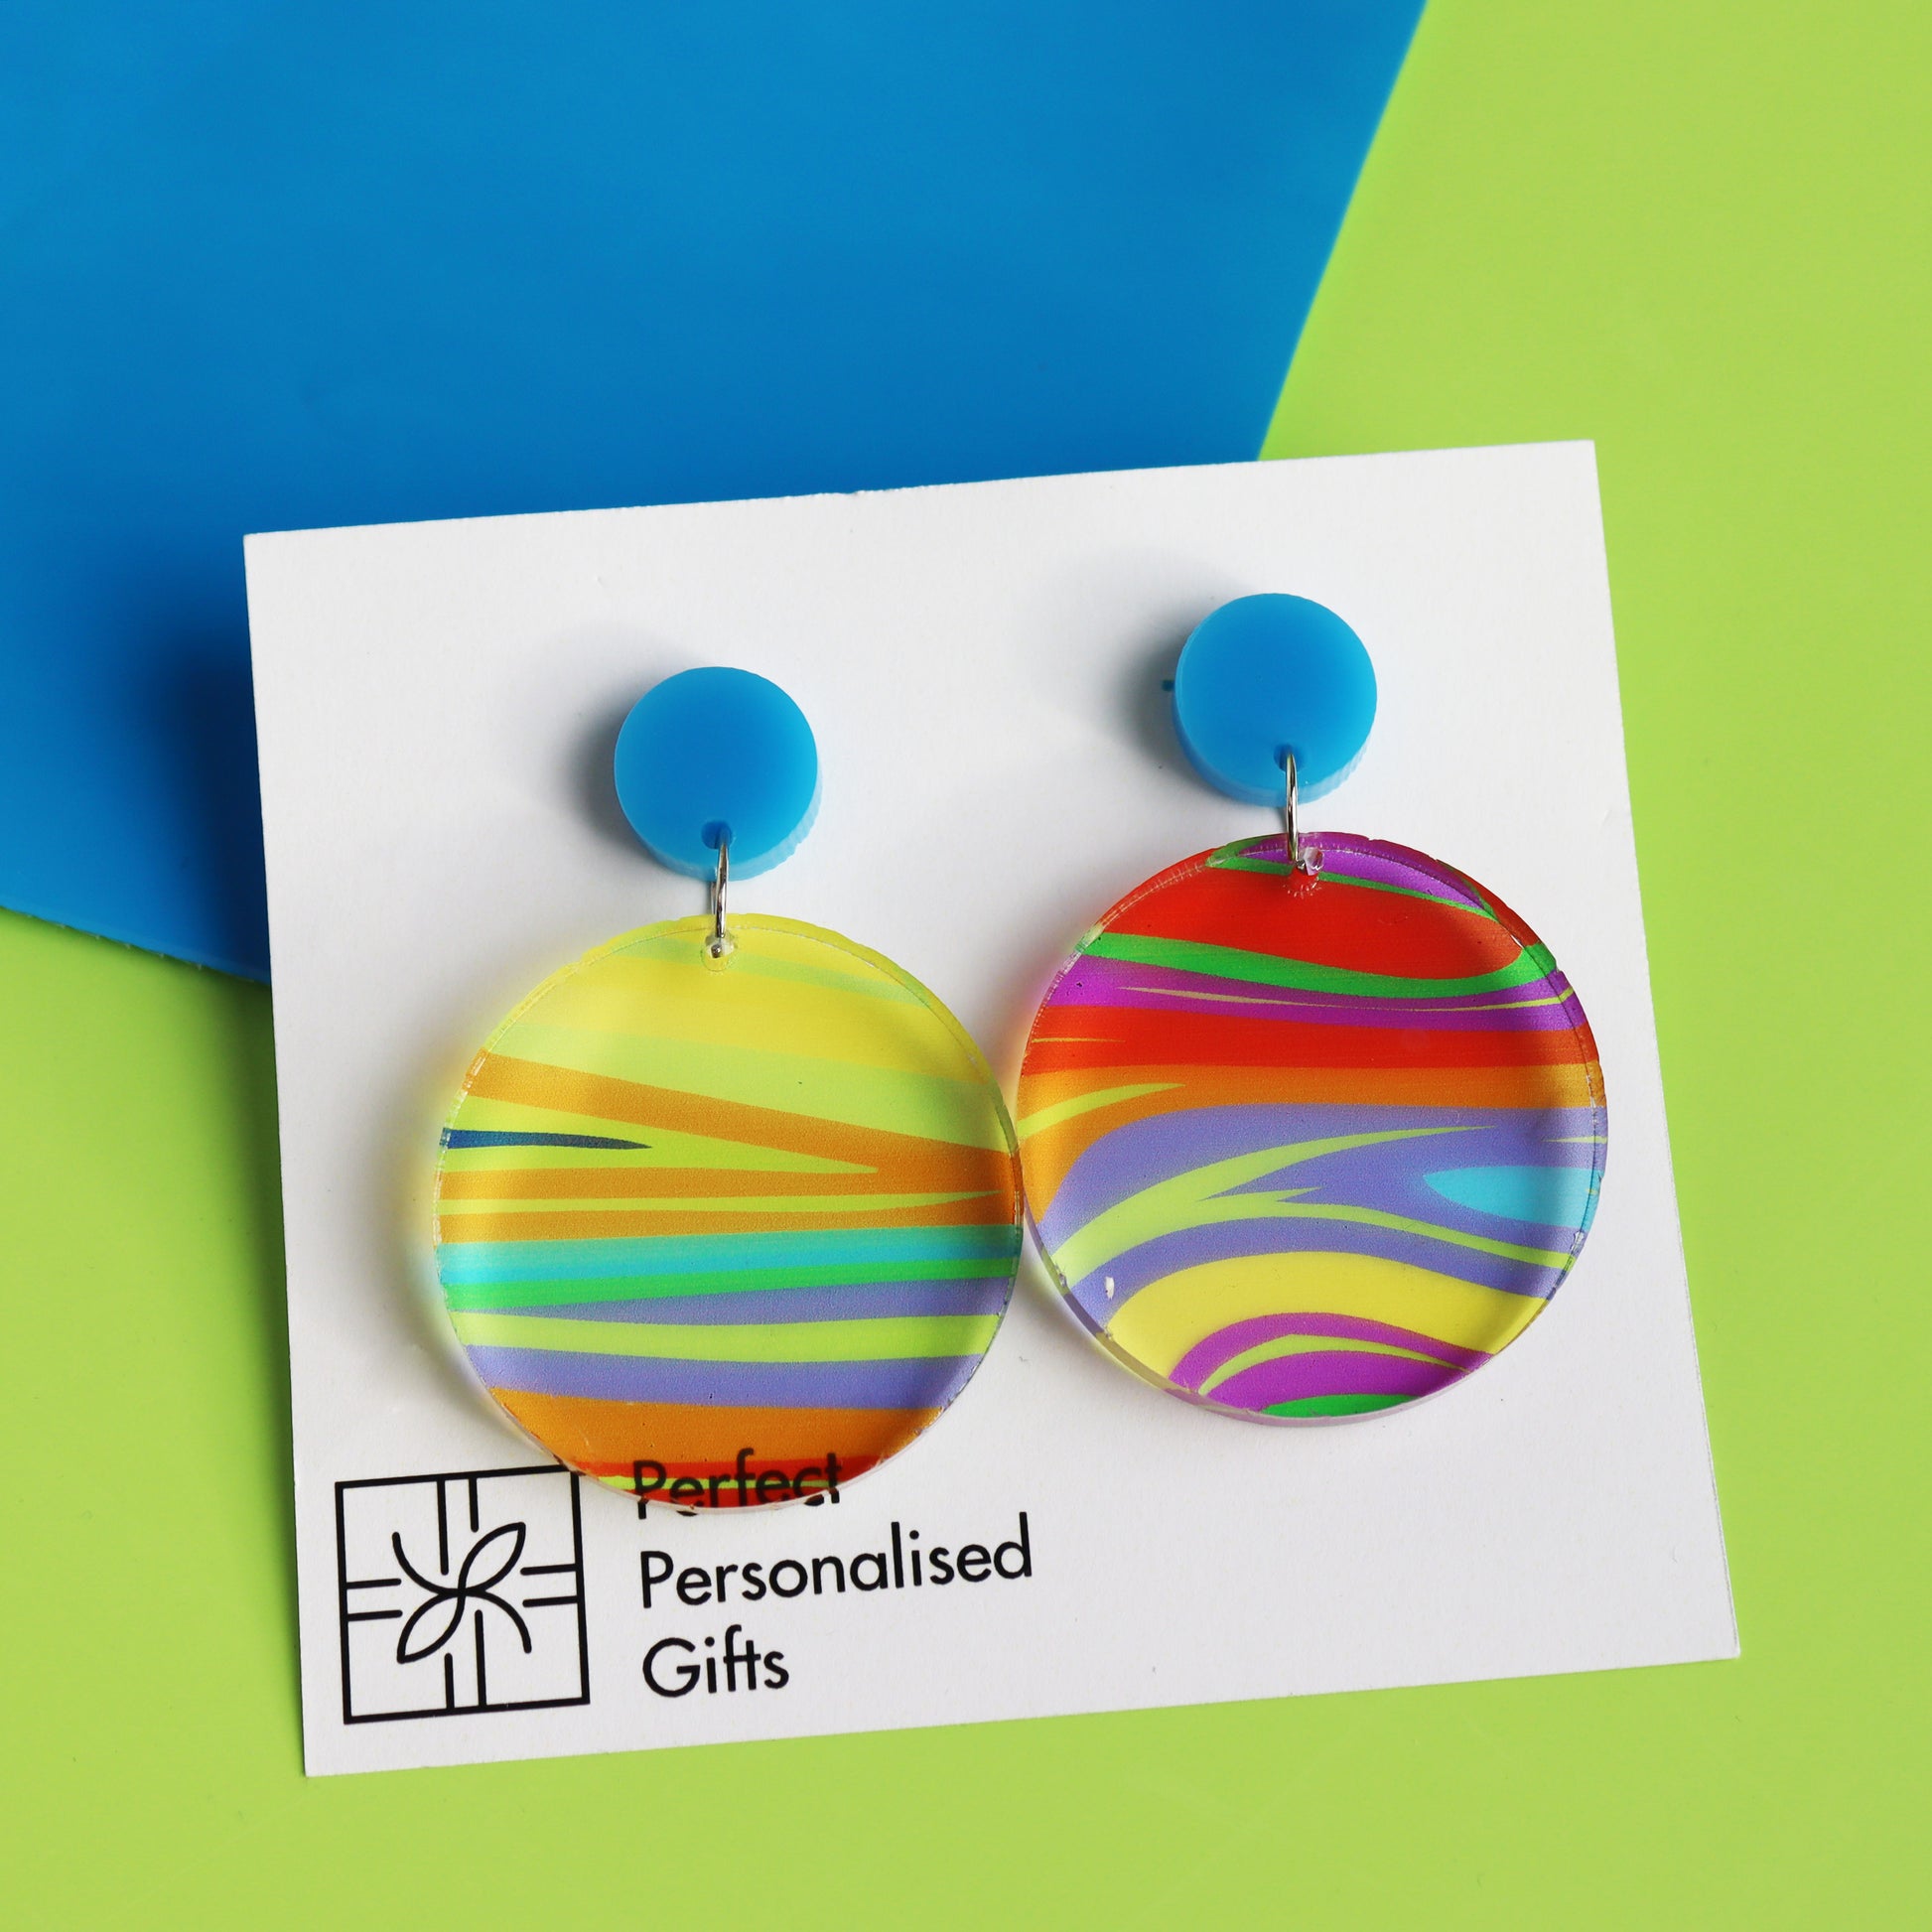 printed acrylic colourful mismatch earrings that have a round blue acrylic stud top and hanging printed acrylic circle hanging on a green backgrund